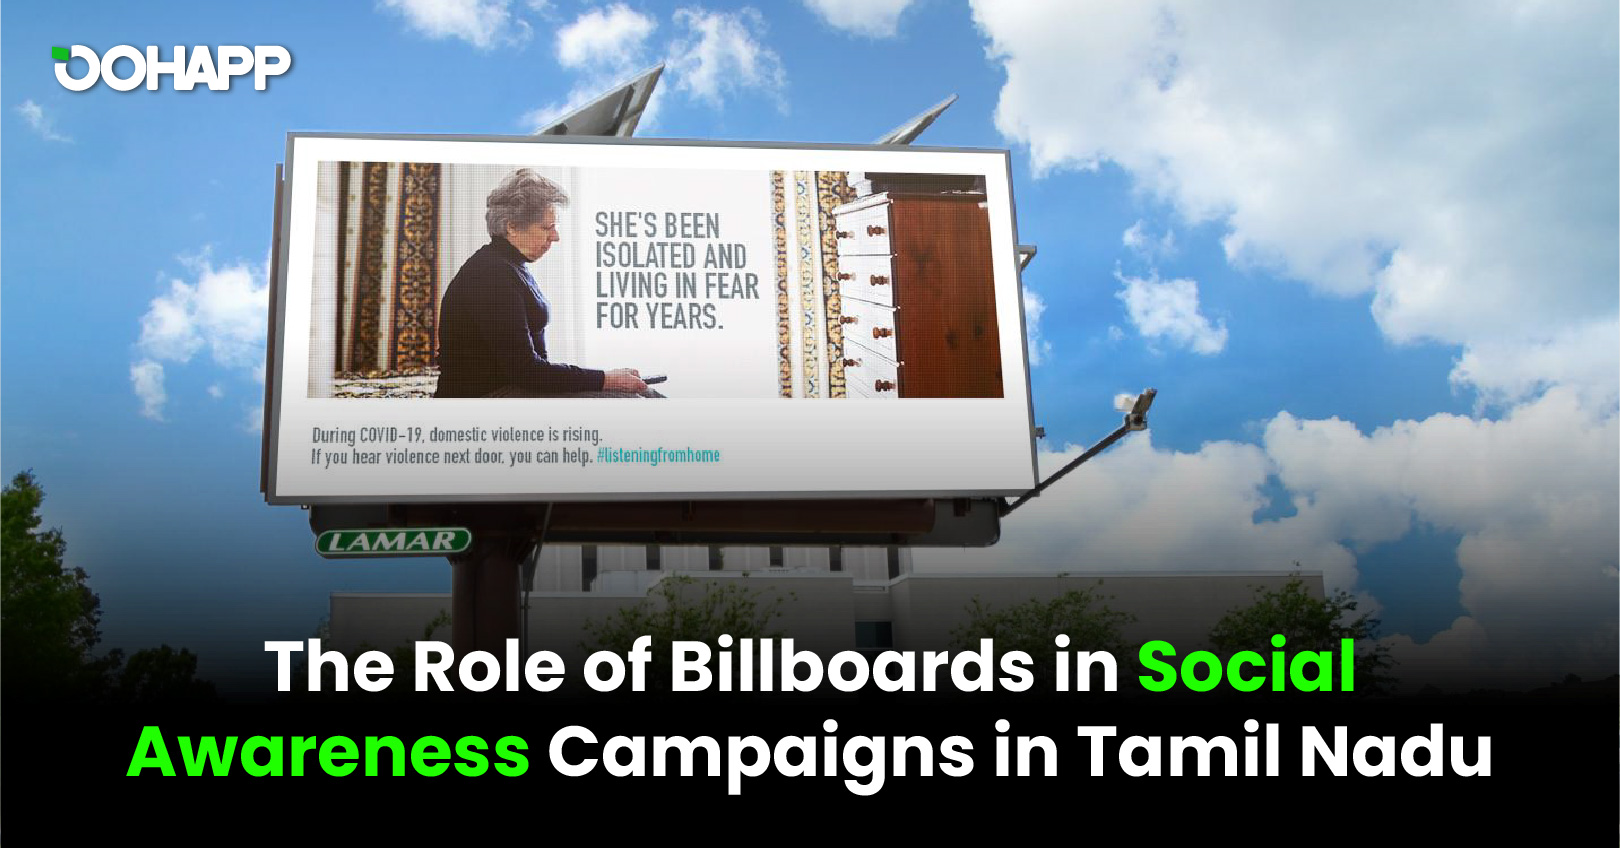 The Role of Billboards in Social Awareness Campaigns in Tamil Nadu